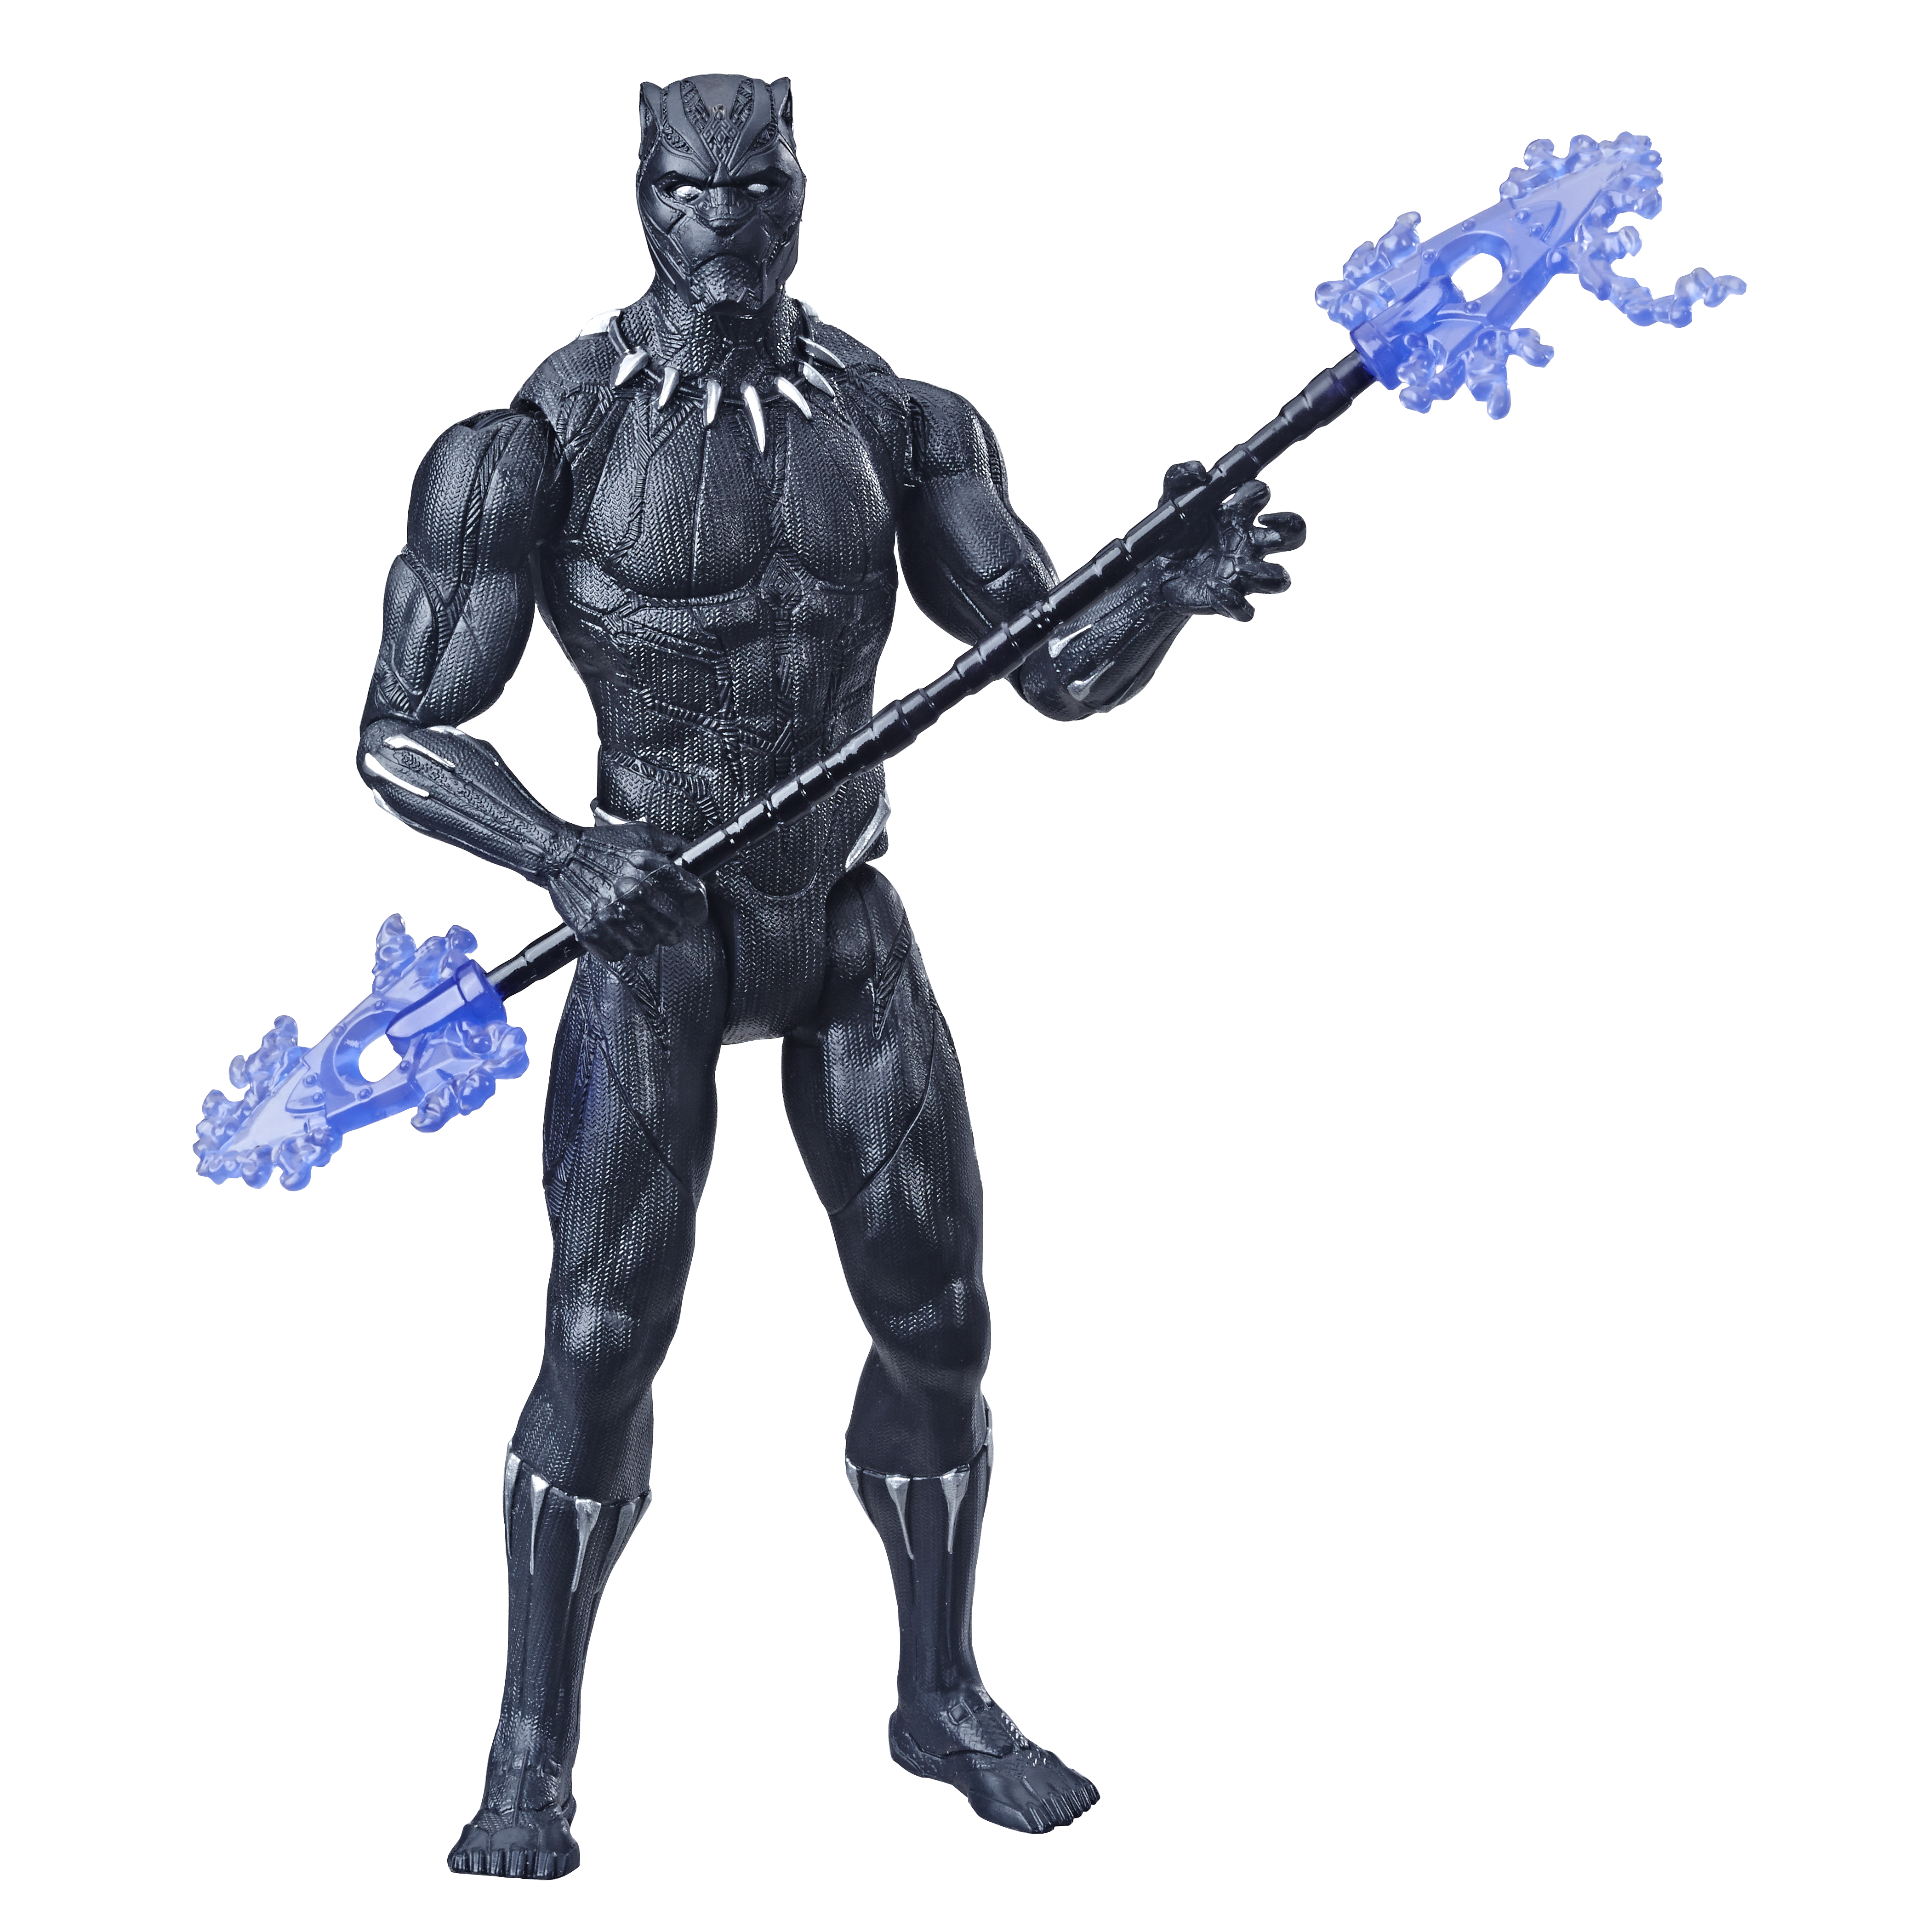 6-inch Black Panther